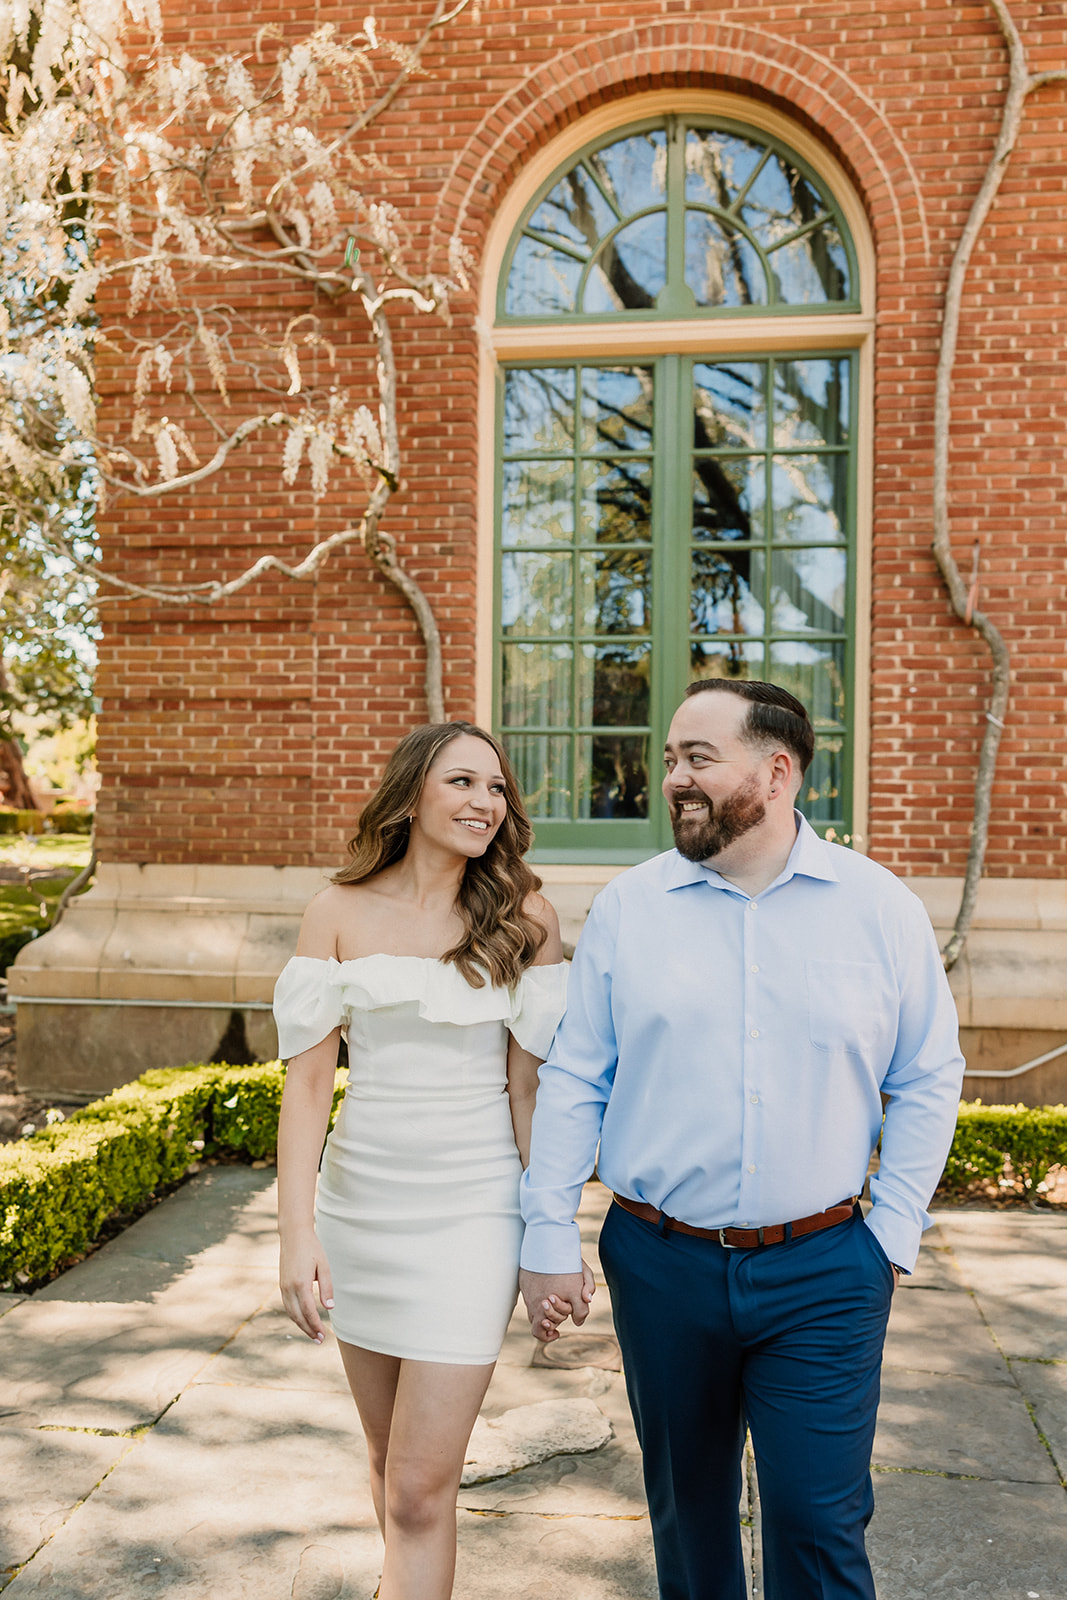 A couple stands hand in hand in front of a large arched window on a brick building, surrounded by greenery and vines for their engagement photos at filoli gardens